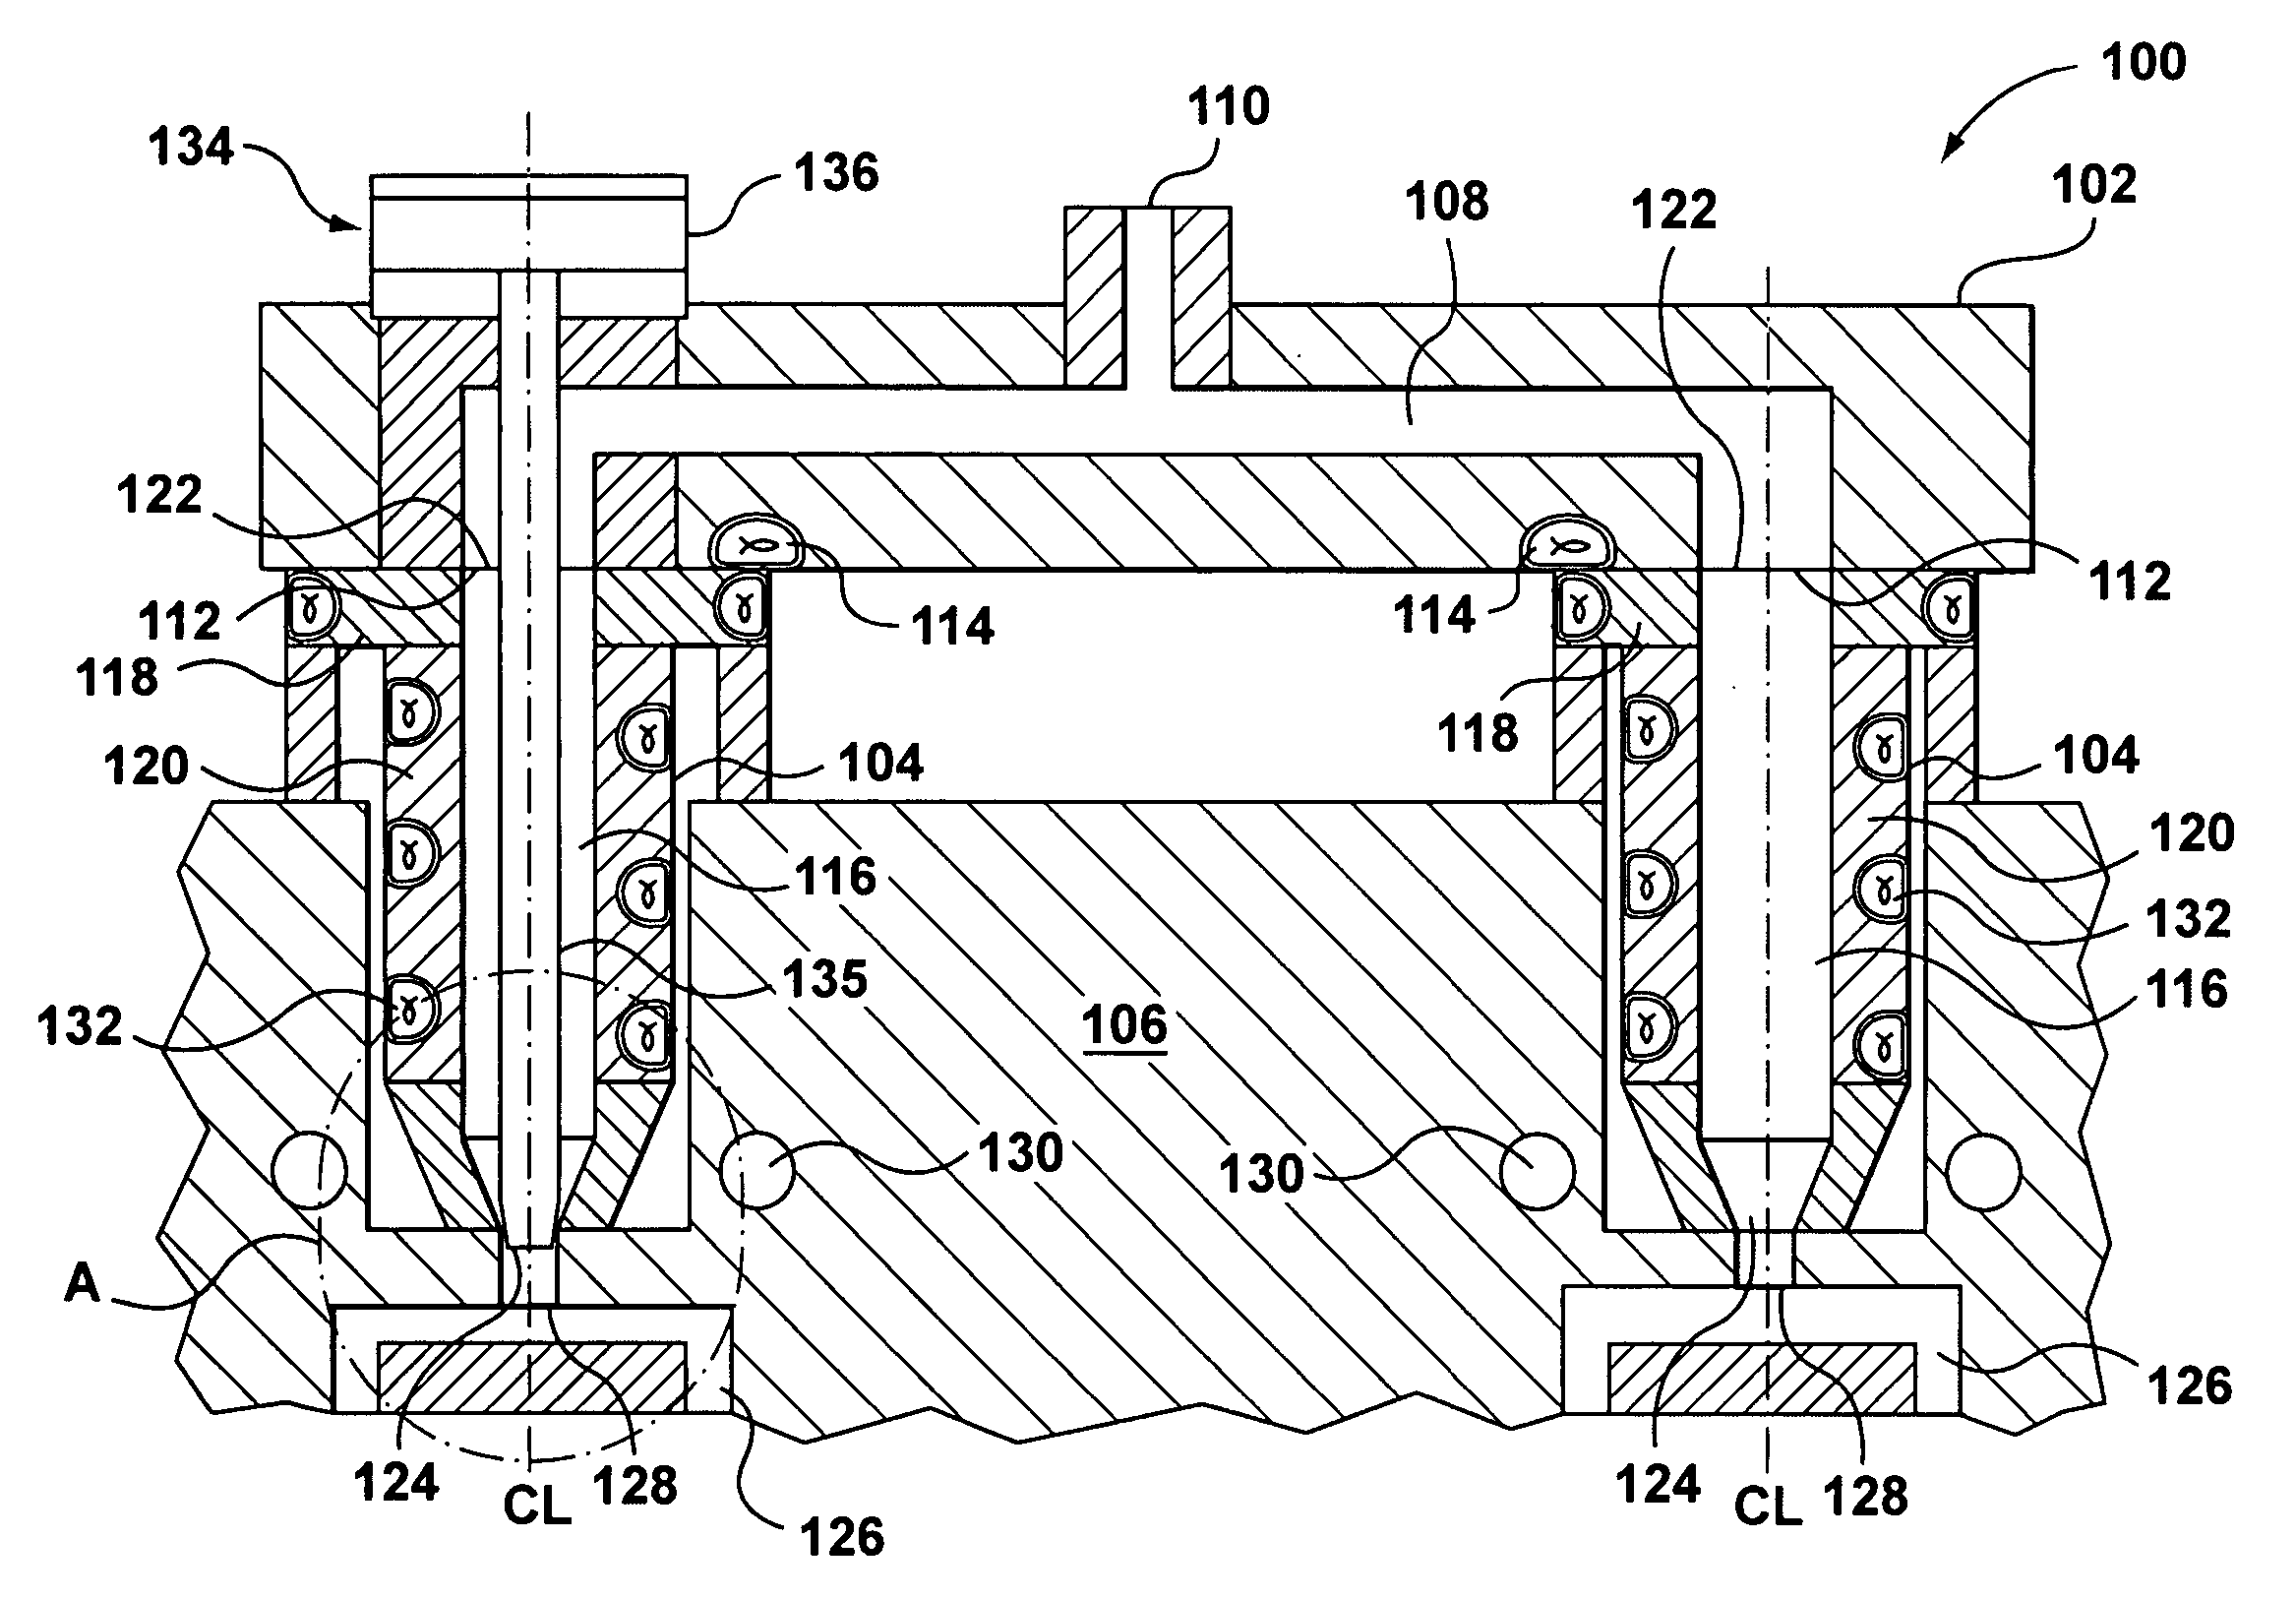 Valve-gated injection moding nozzle having an annular flow